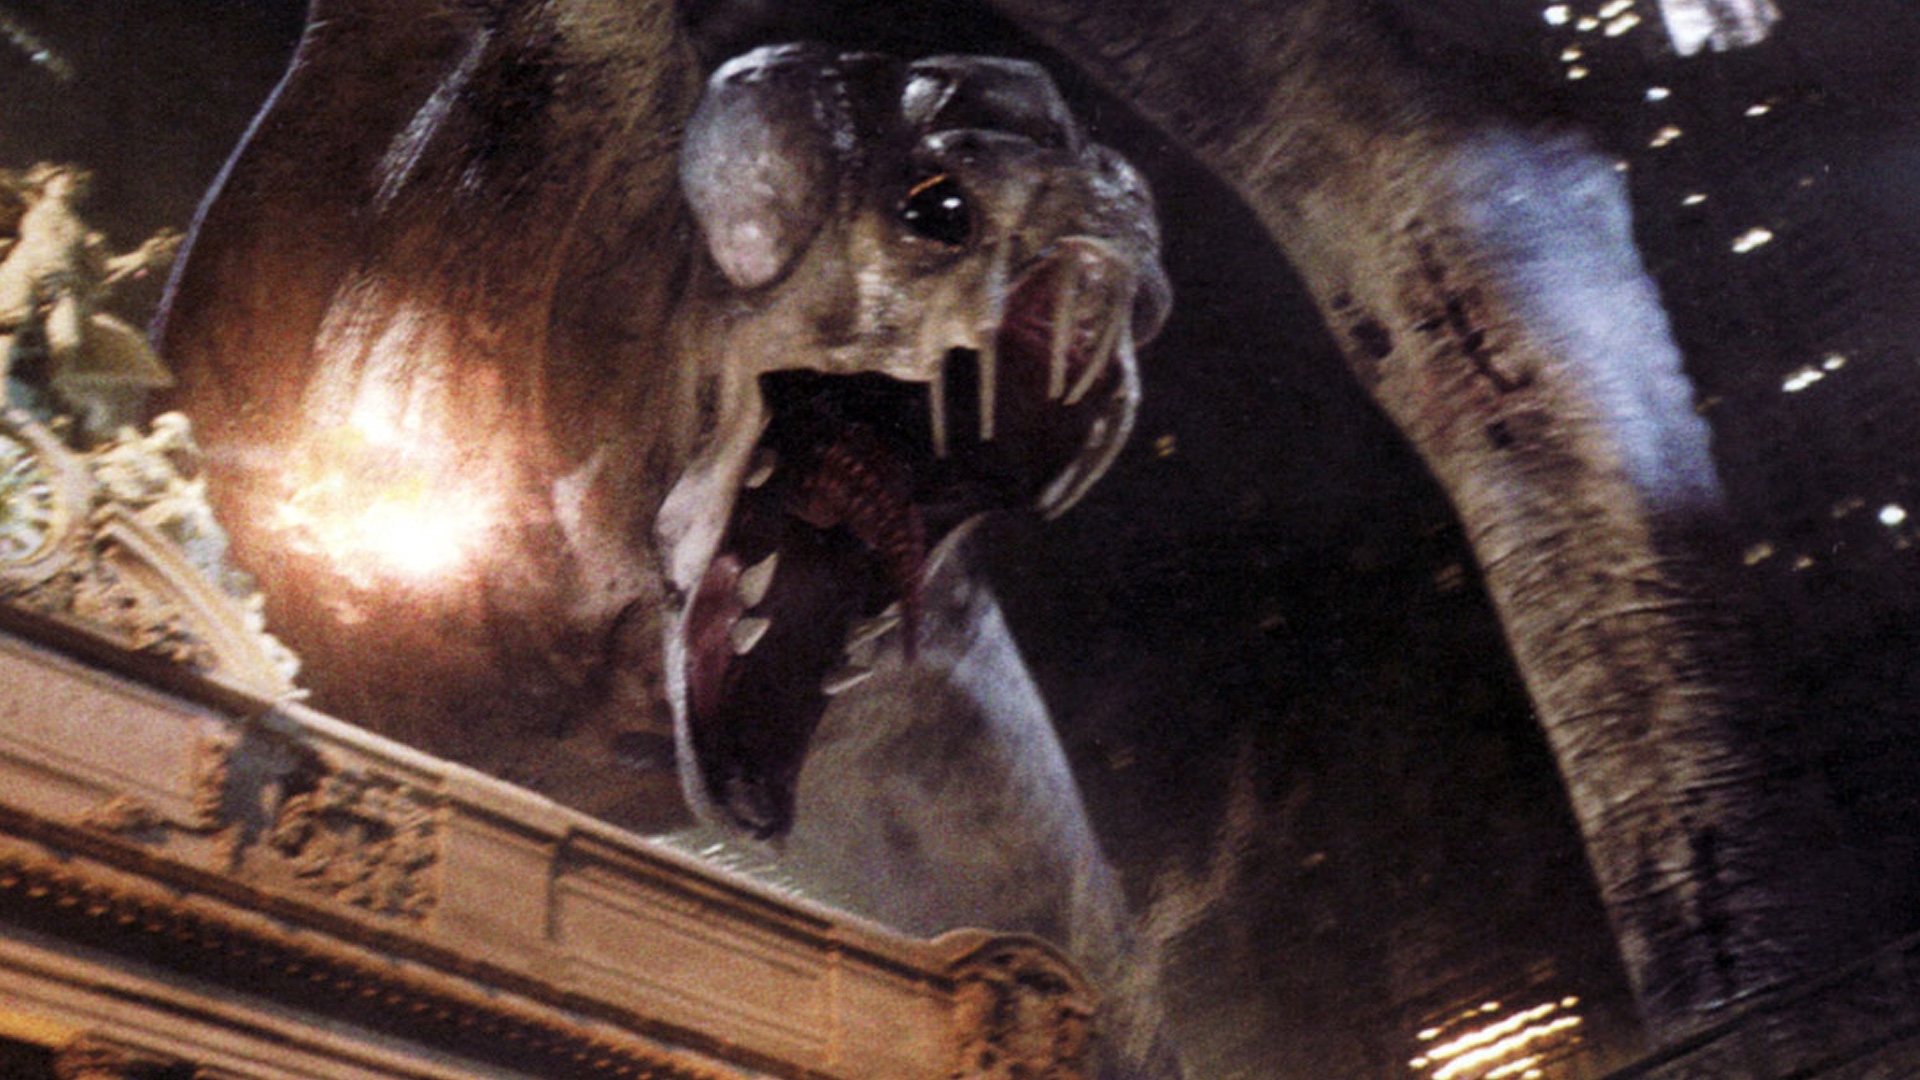 J.J. Abrams' GOD PARTICLE Confirmed as Another CLOVERFIELD Film